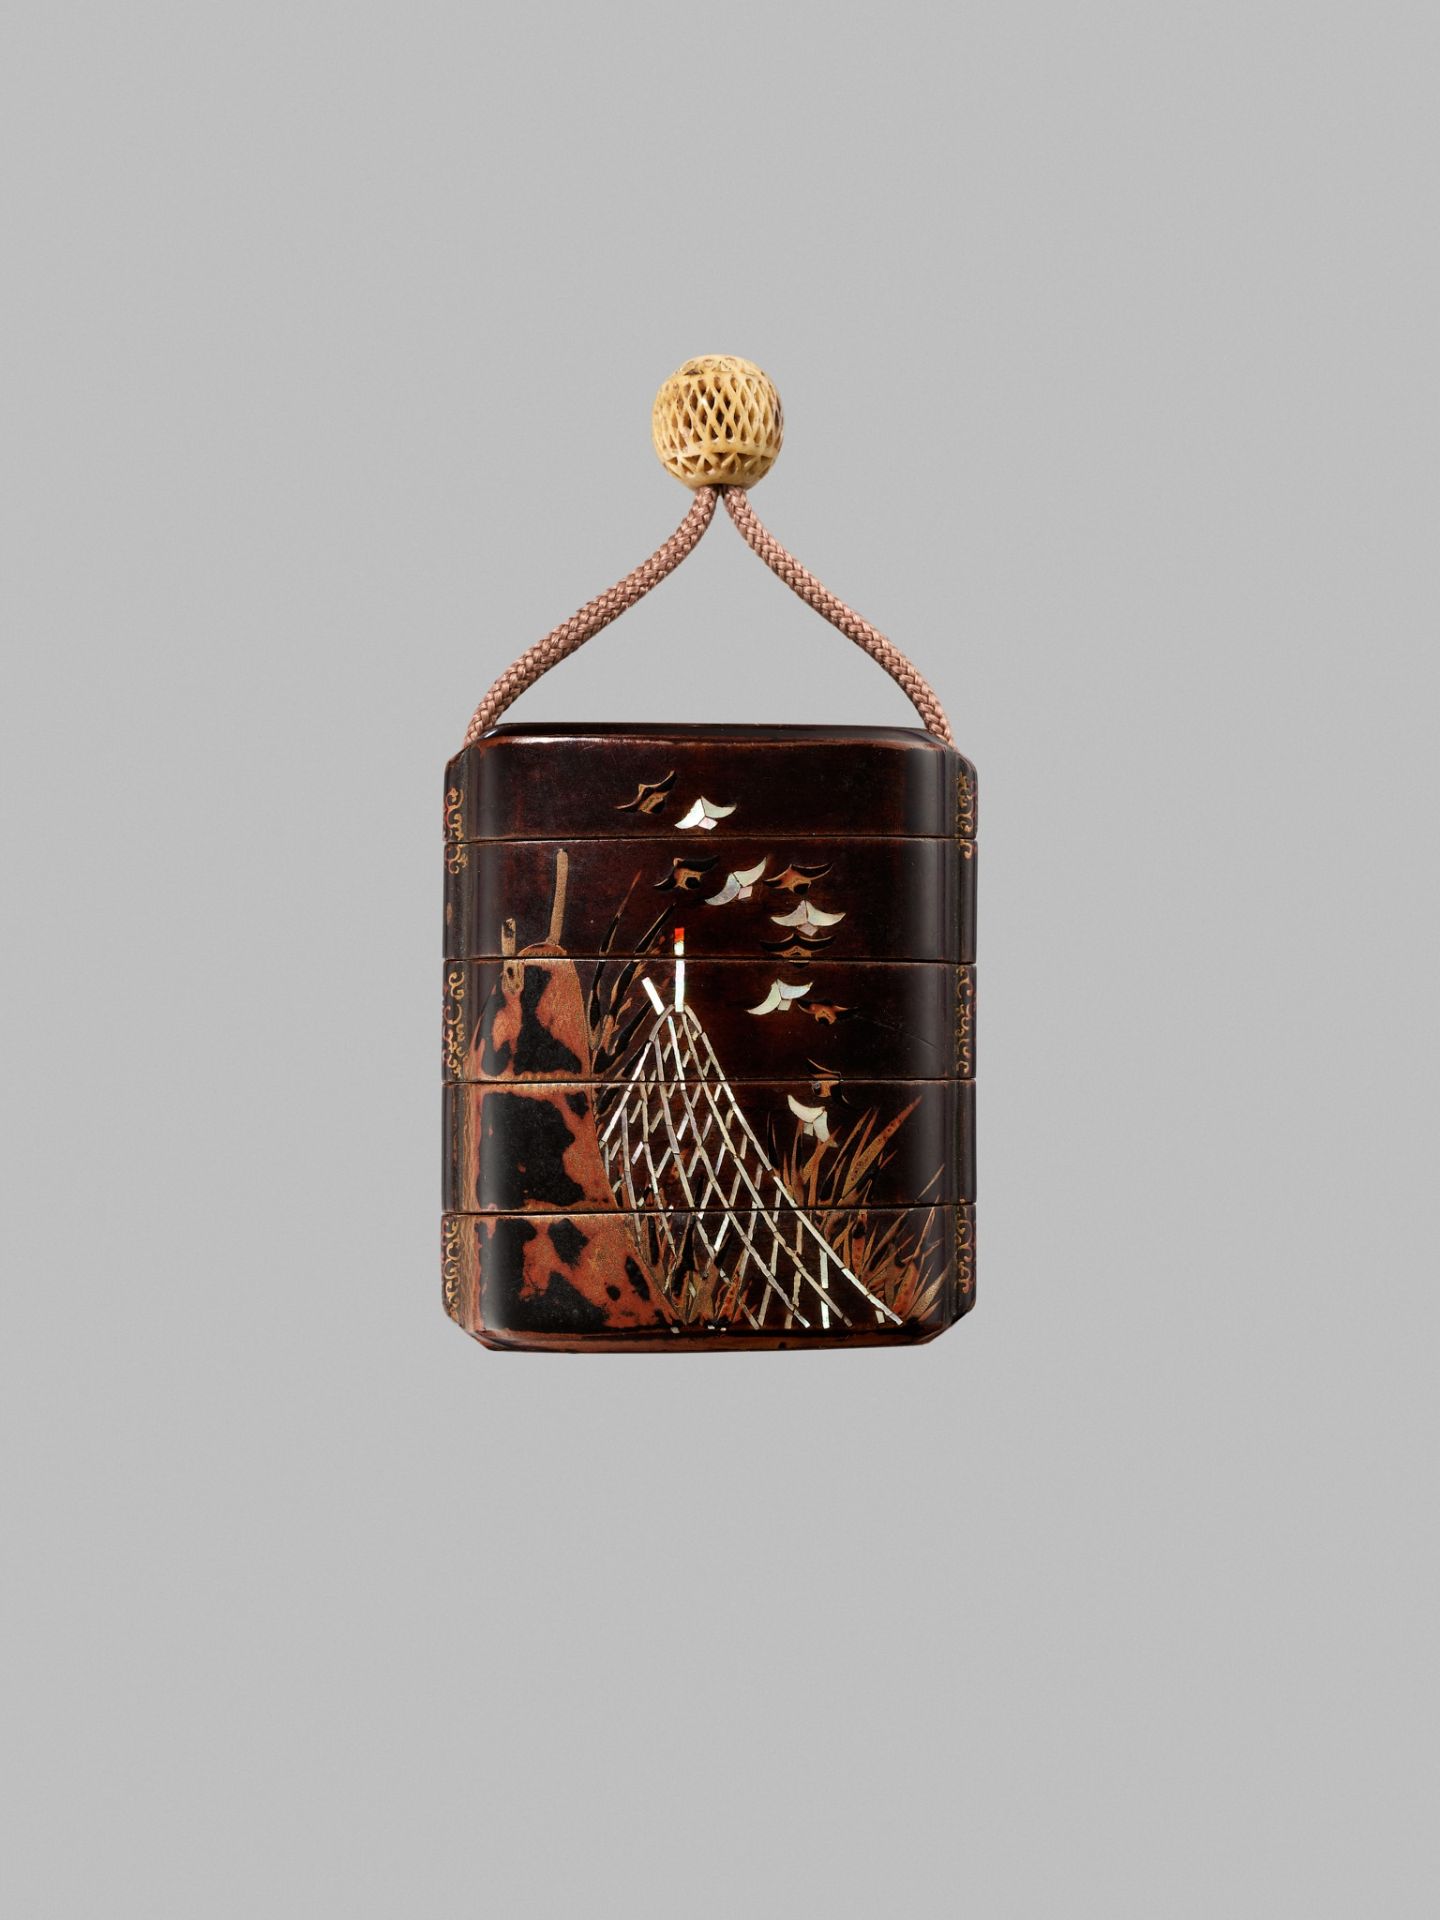 A FINE FOUR-CASE INRO DEPICTING BIRDS IN FLIGHT ABOVE NETS AND FISH TRAPS - Image 7 of 8